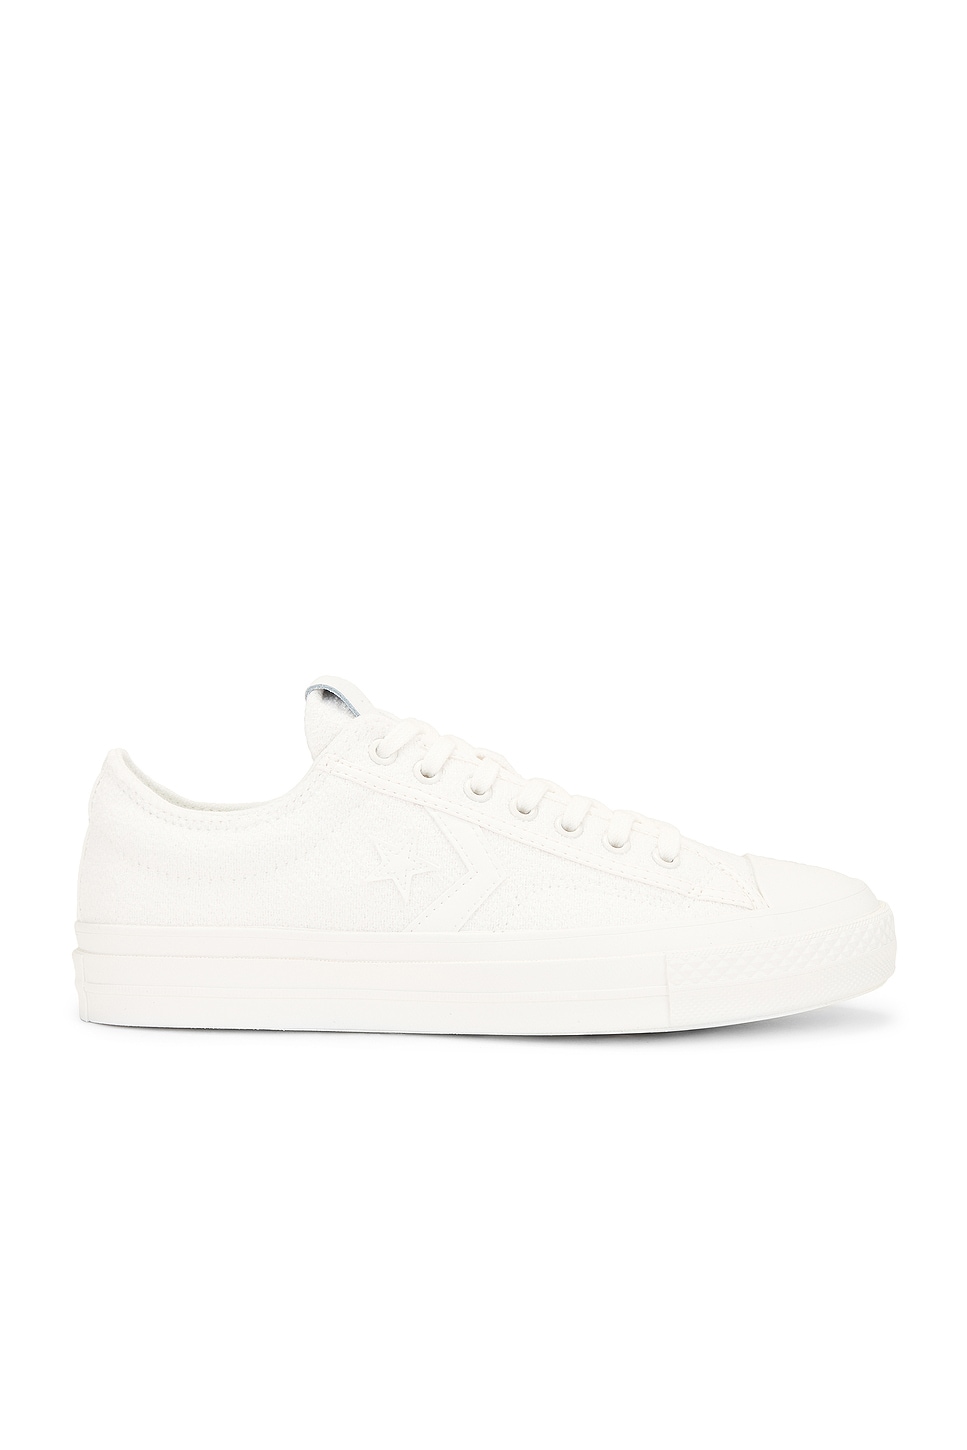 Image 1 of Converse Star Player 76 Monochrome in Vintage White